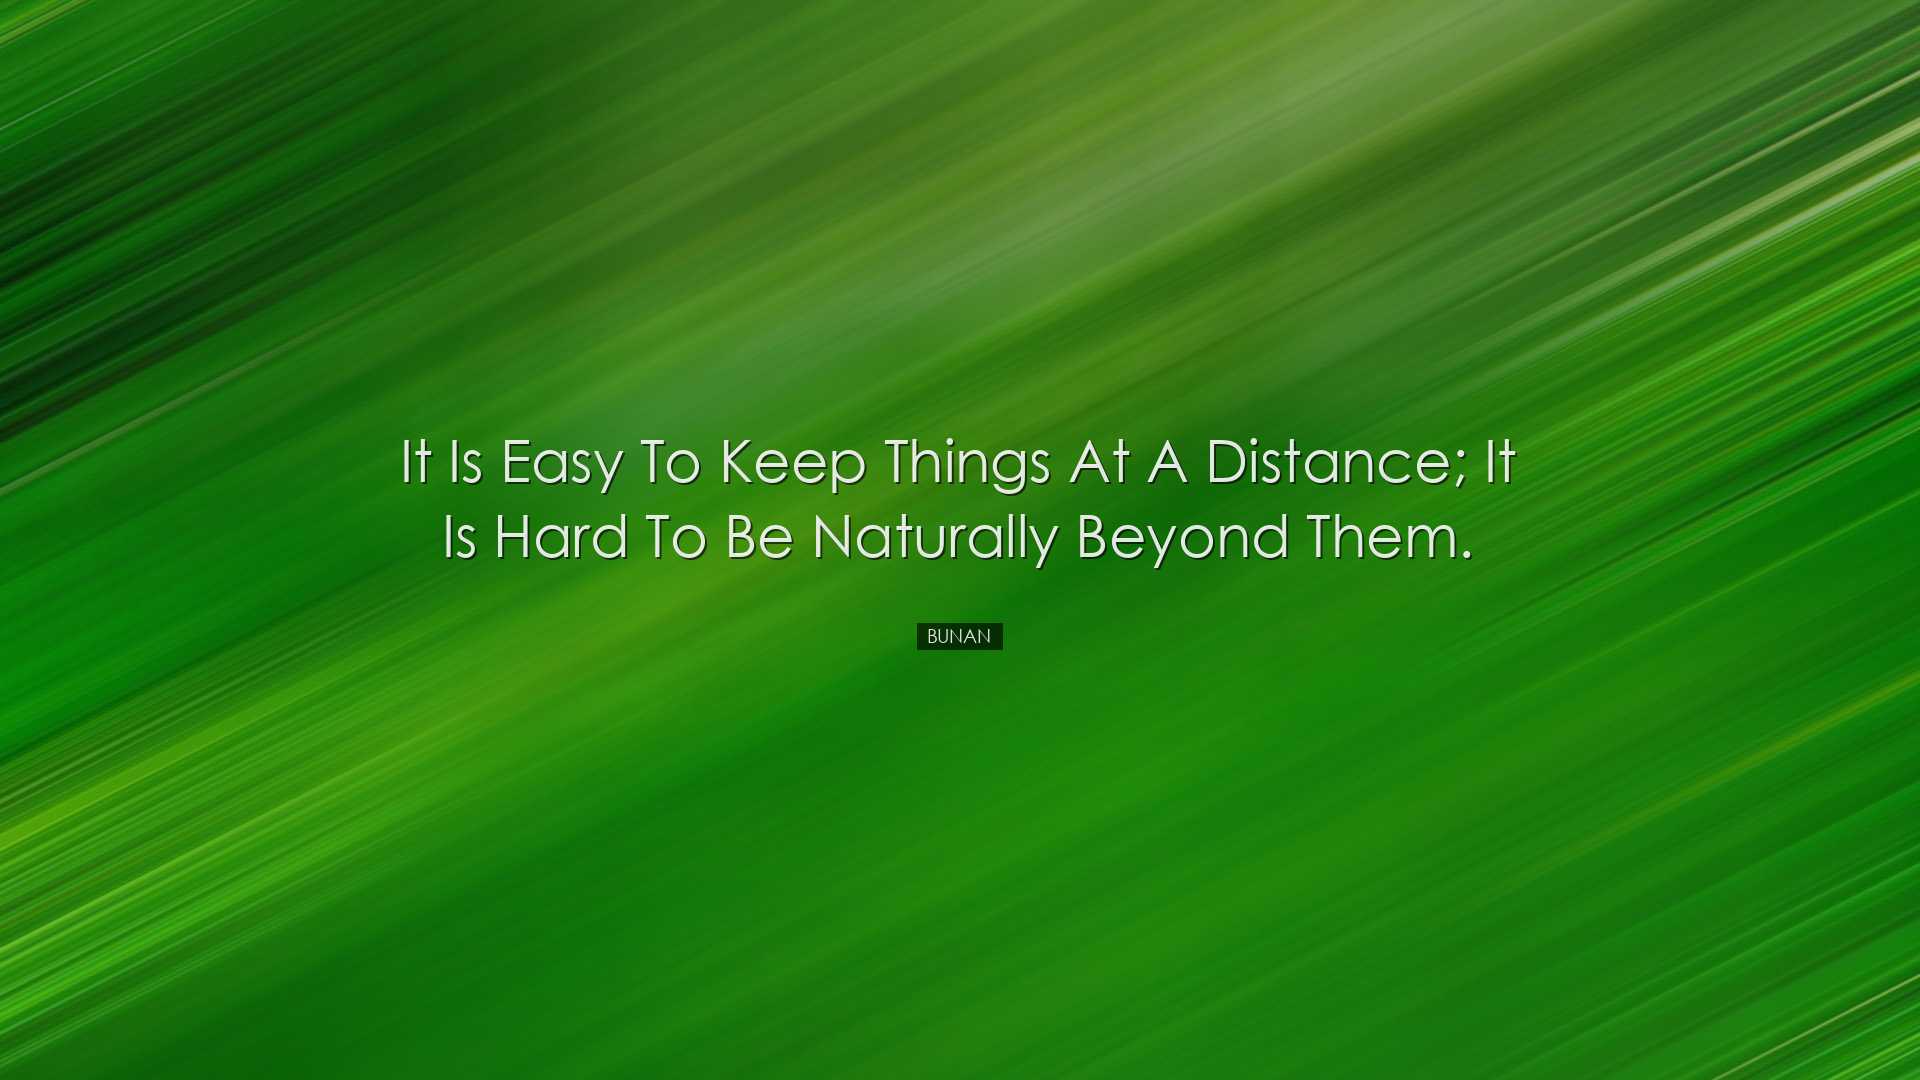 It is easy to keep things at a distance; it is hard to be naturall